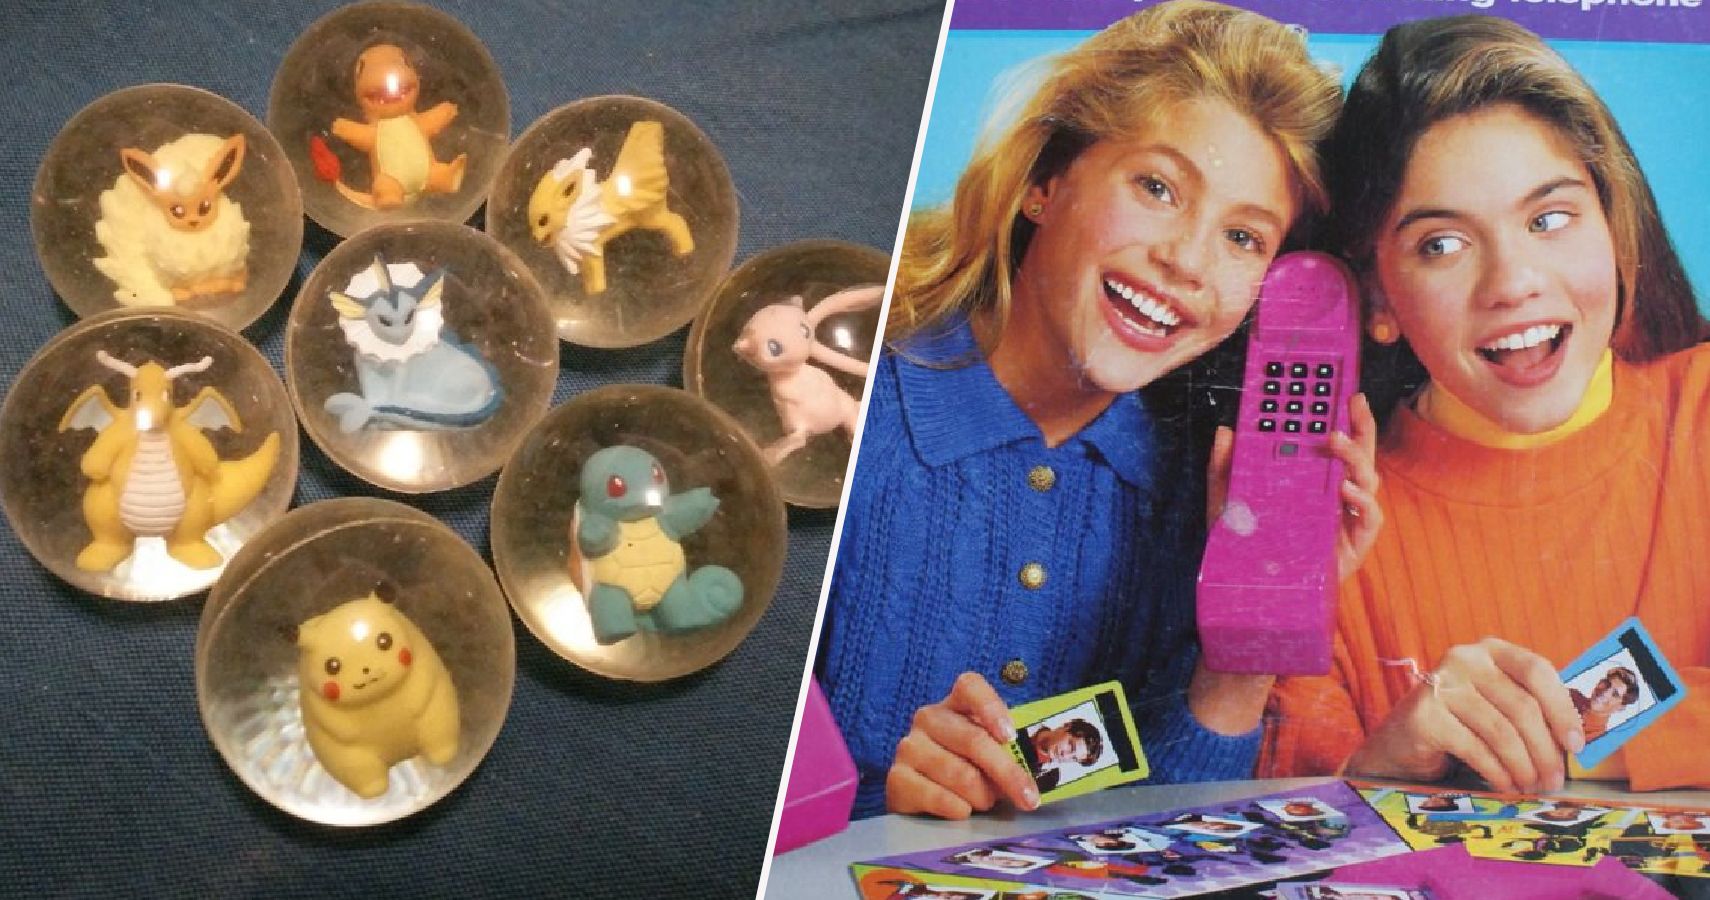 90s toys board games